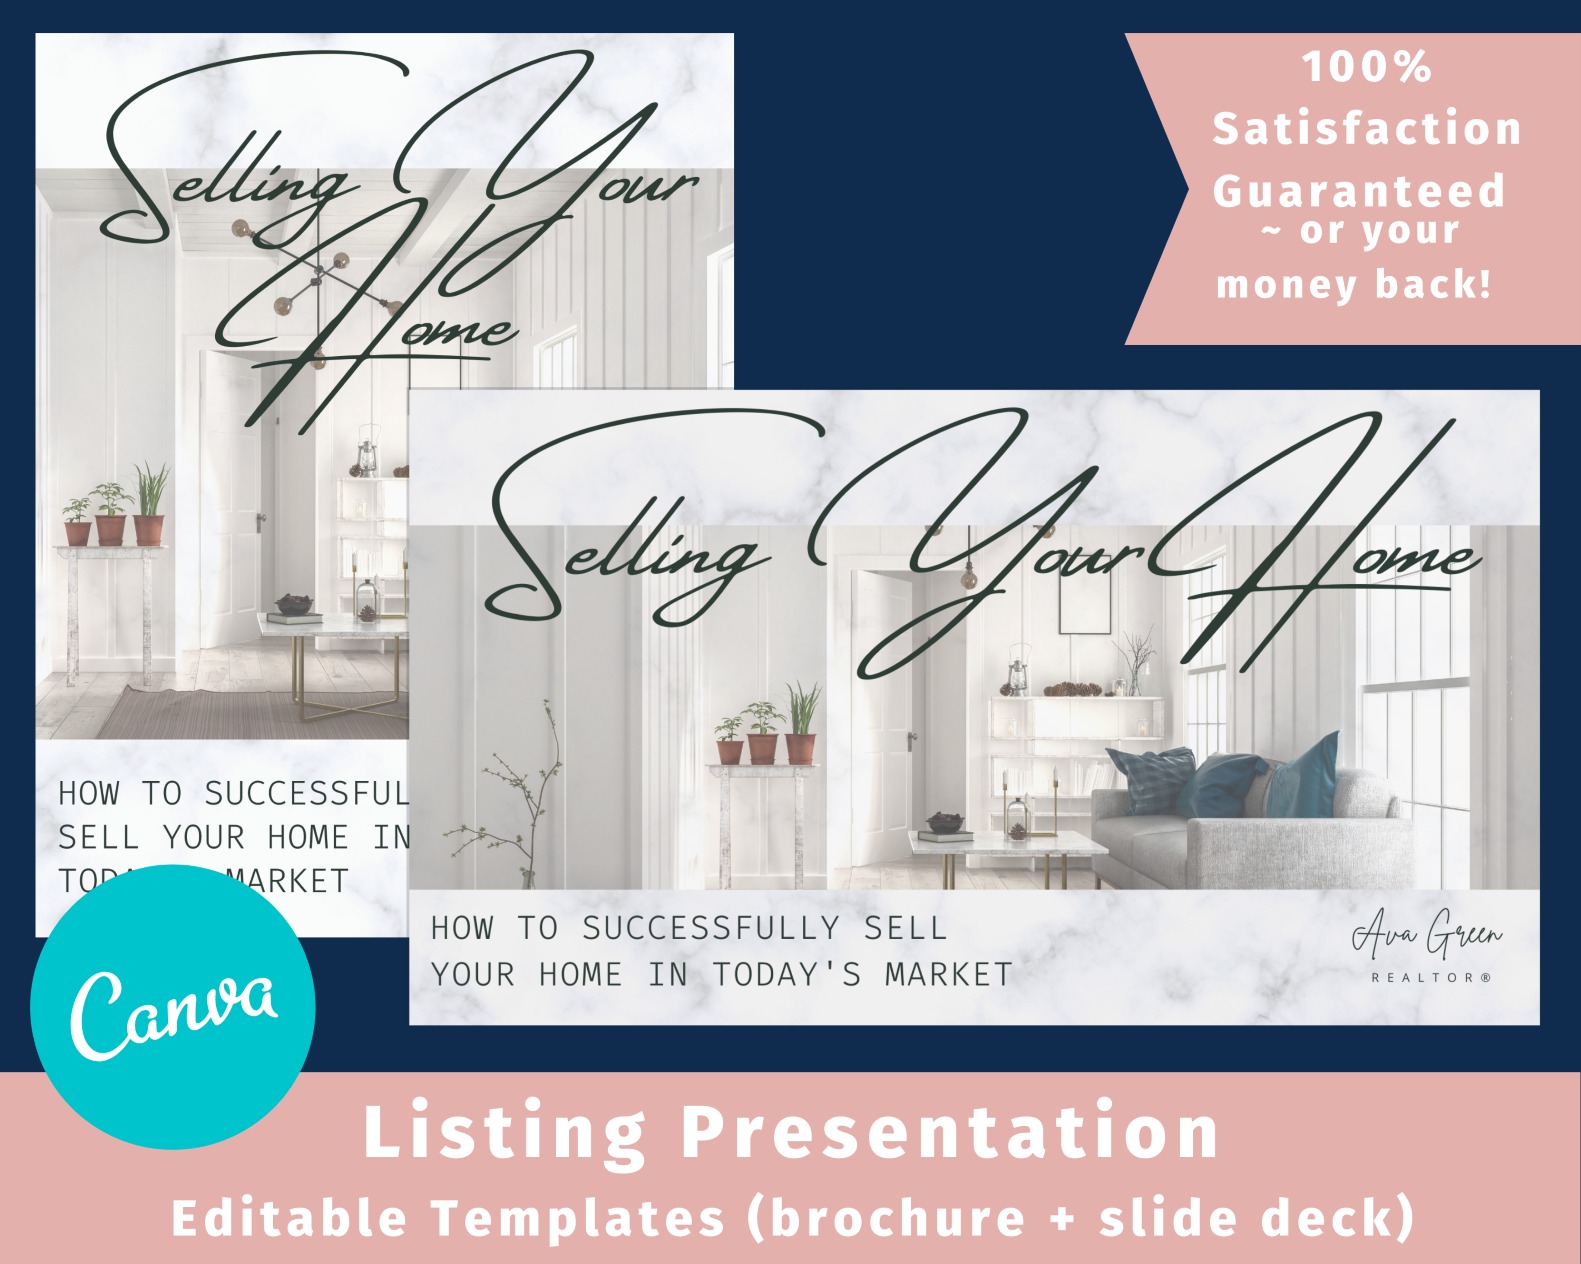 listing presentation can be compared to